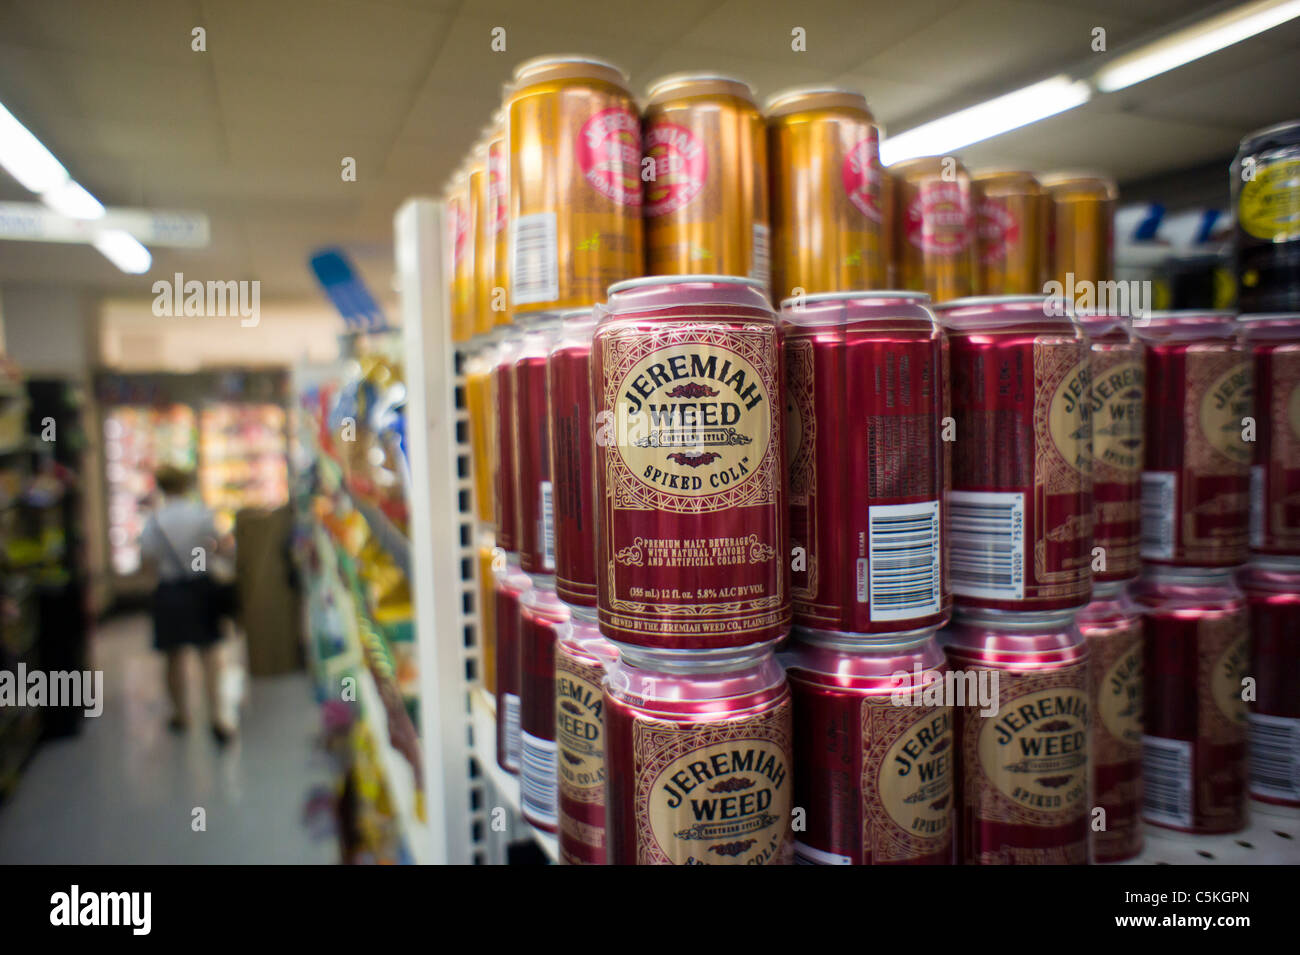 Six-packs of Jeremiah Weed brand malt beverages are seen on a grocery store shelf in New York Stock Photo